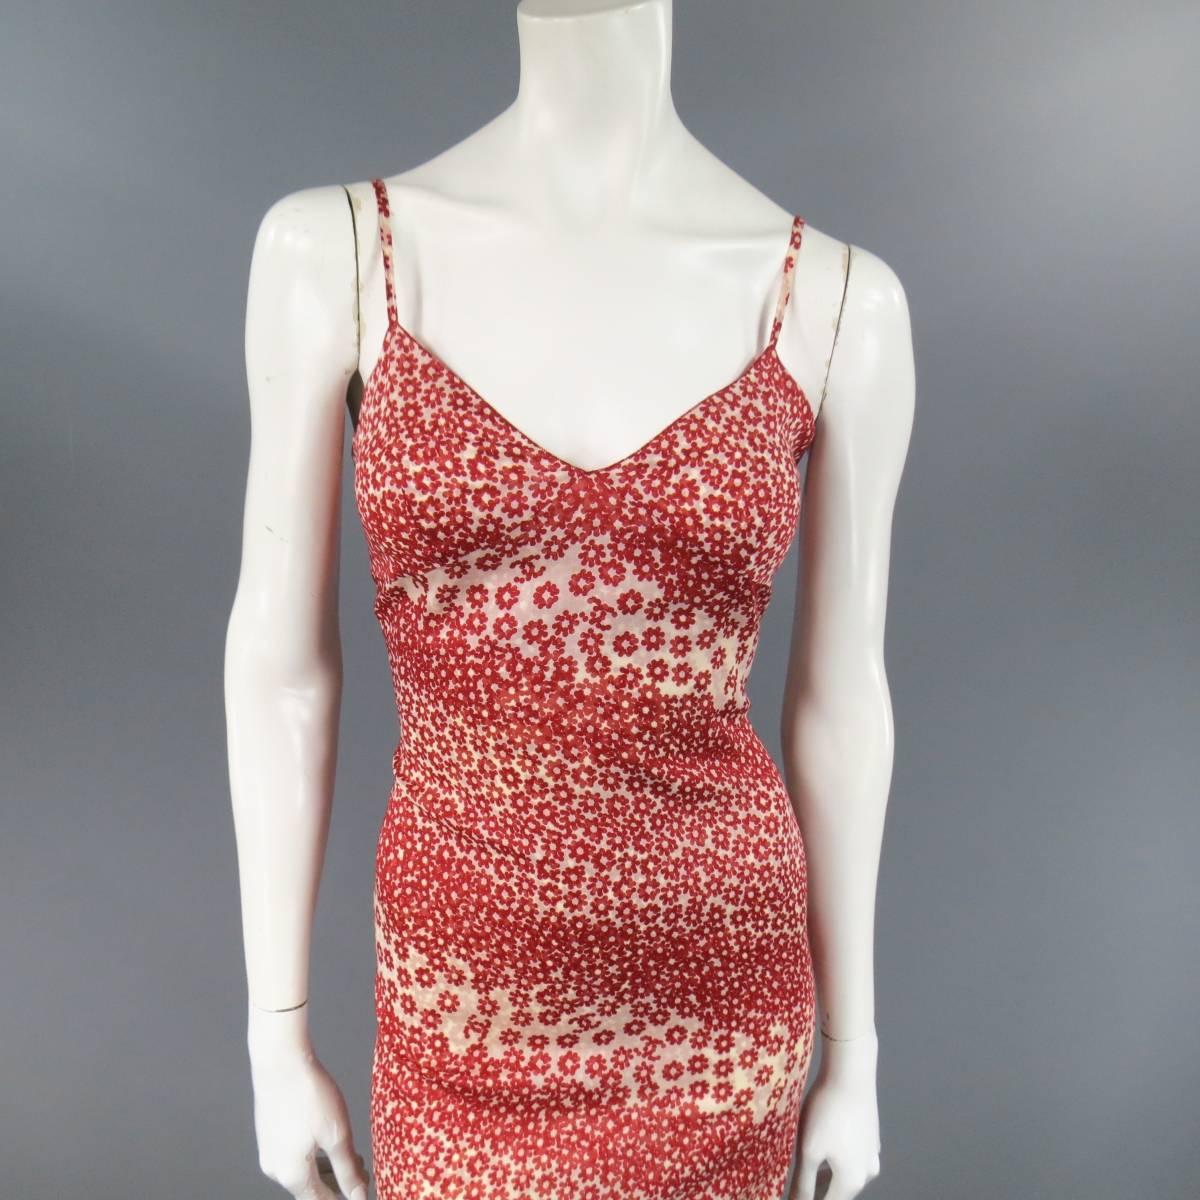 This gorgeous CHANEL Spring Summer 2003 Collection slip dress comes in a beige light weight cotton gauze with all over cool red spotted floral  stripes with  CC print and features skinny straps, underbust bralette seams, fitted shift silhouette,